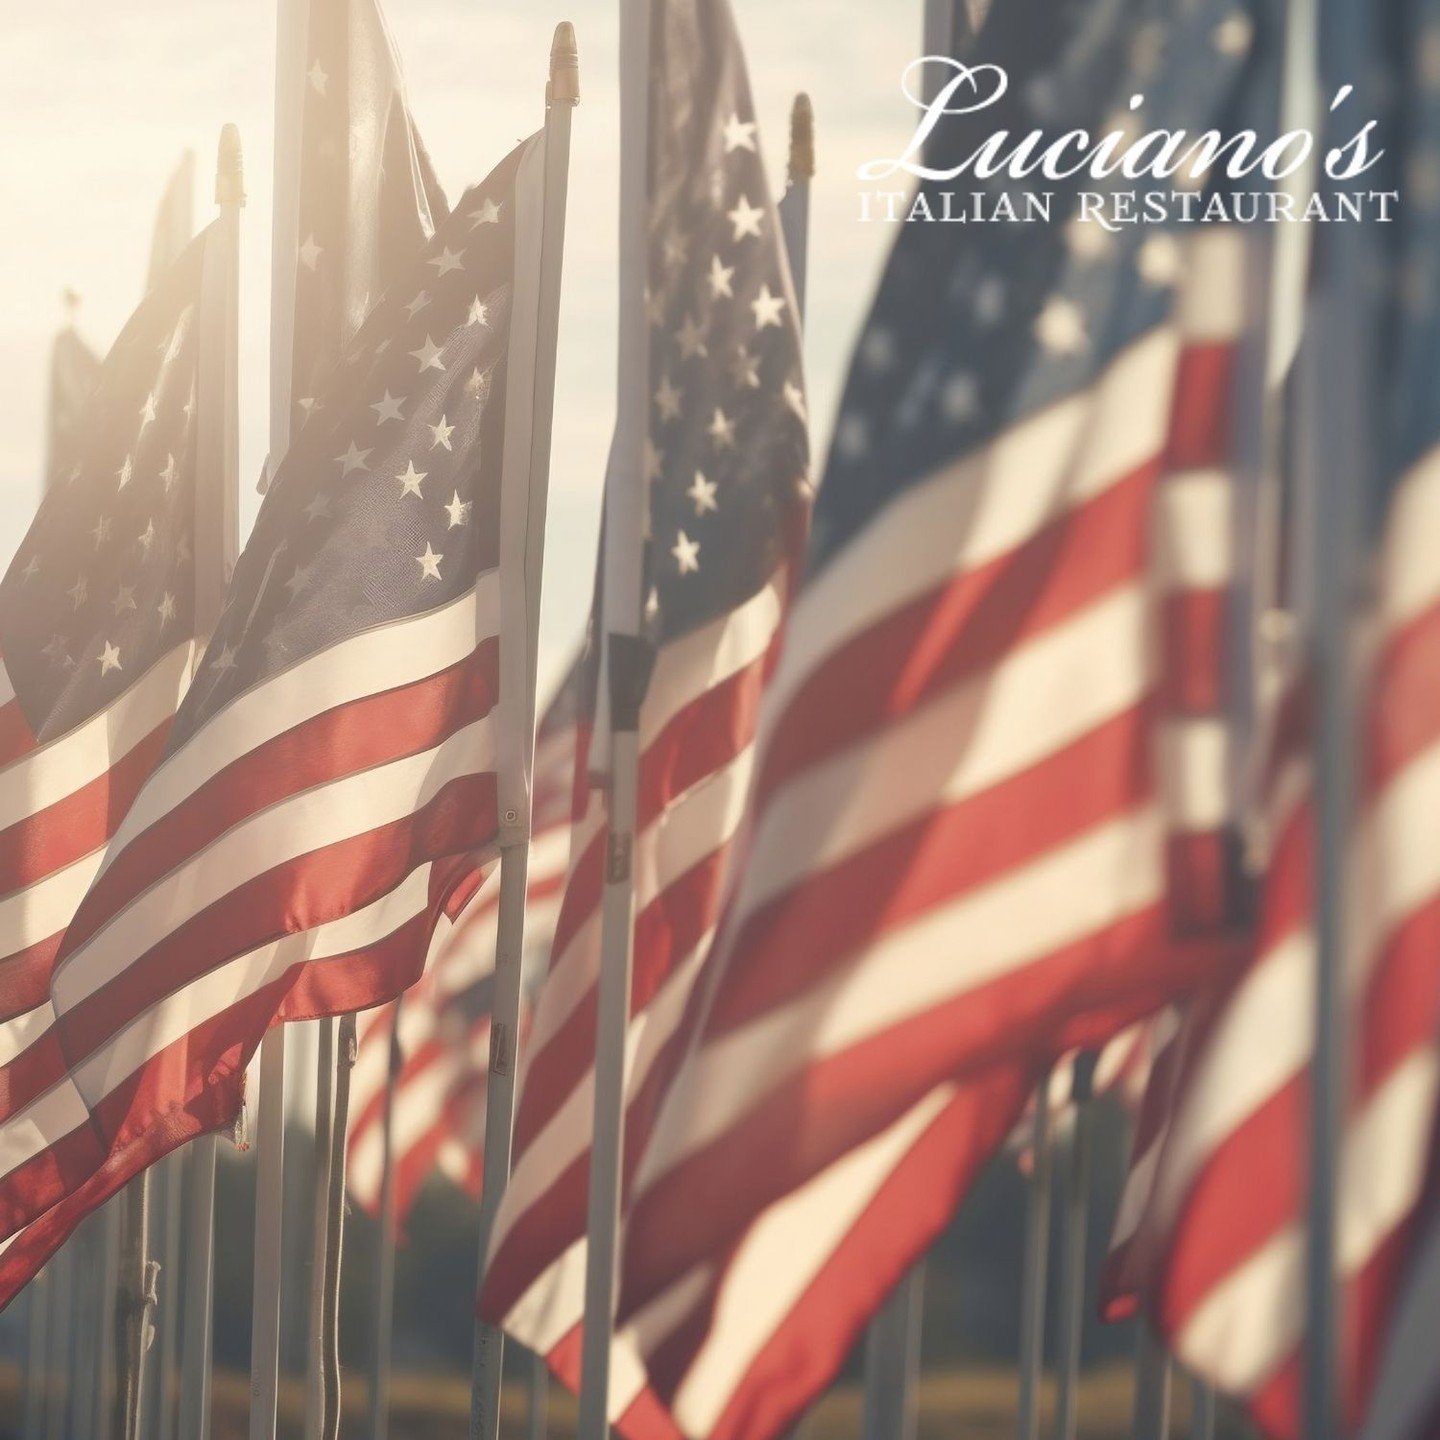 Join us at Luciano's this Memorial Day weekend: Open Friday and Saturday, closed Sunday and Monday!